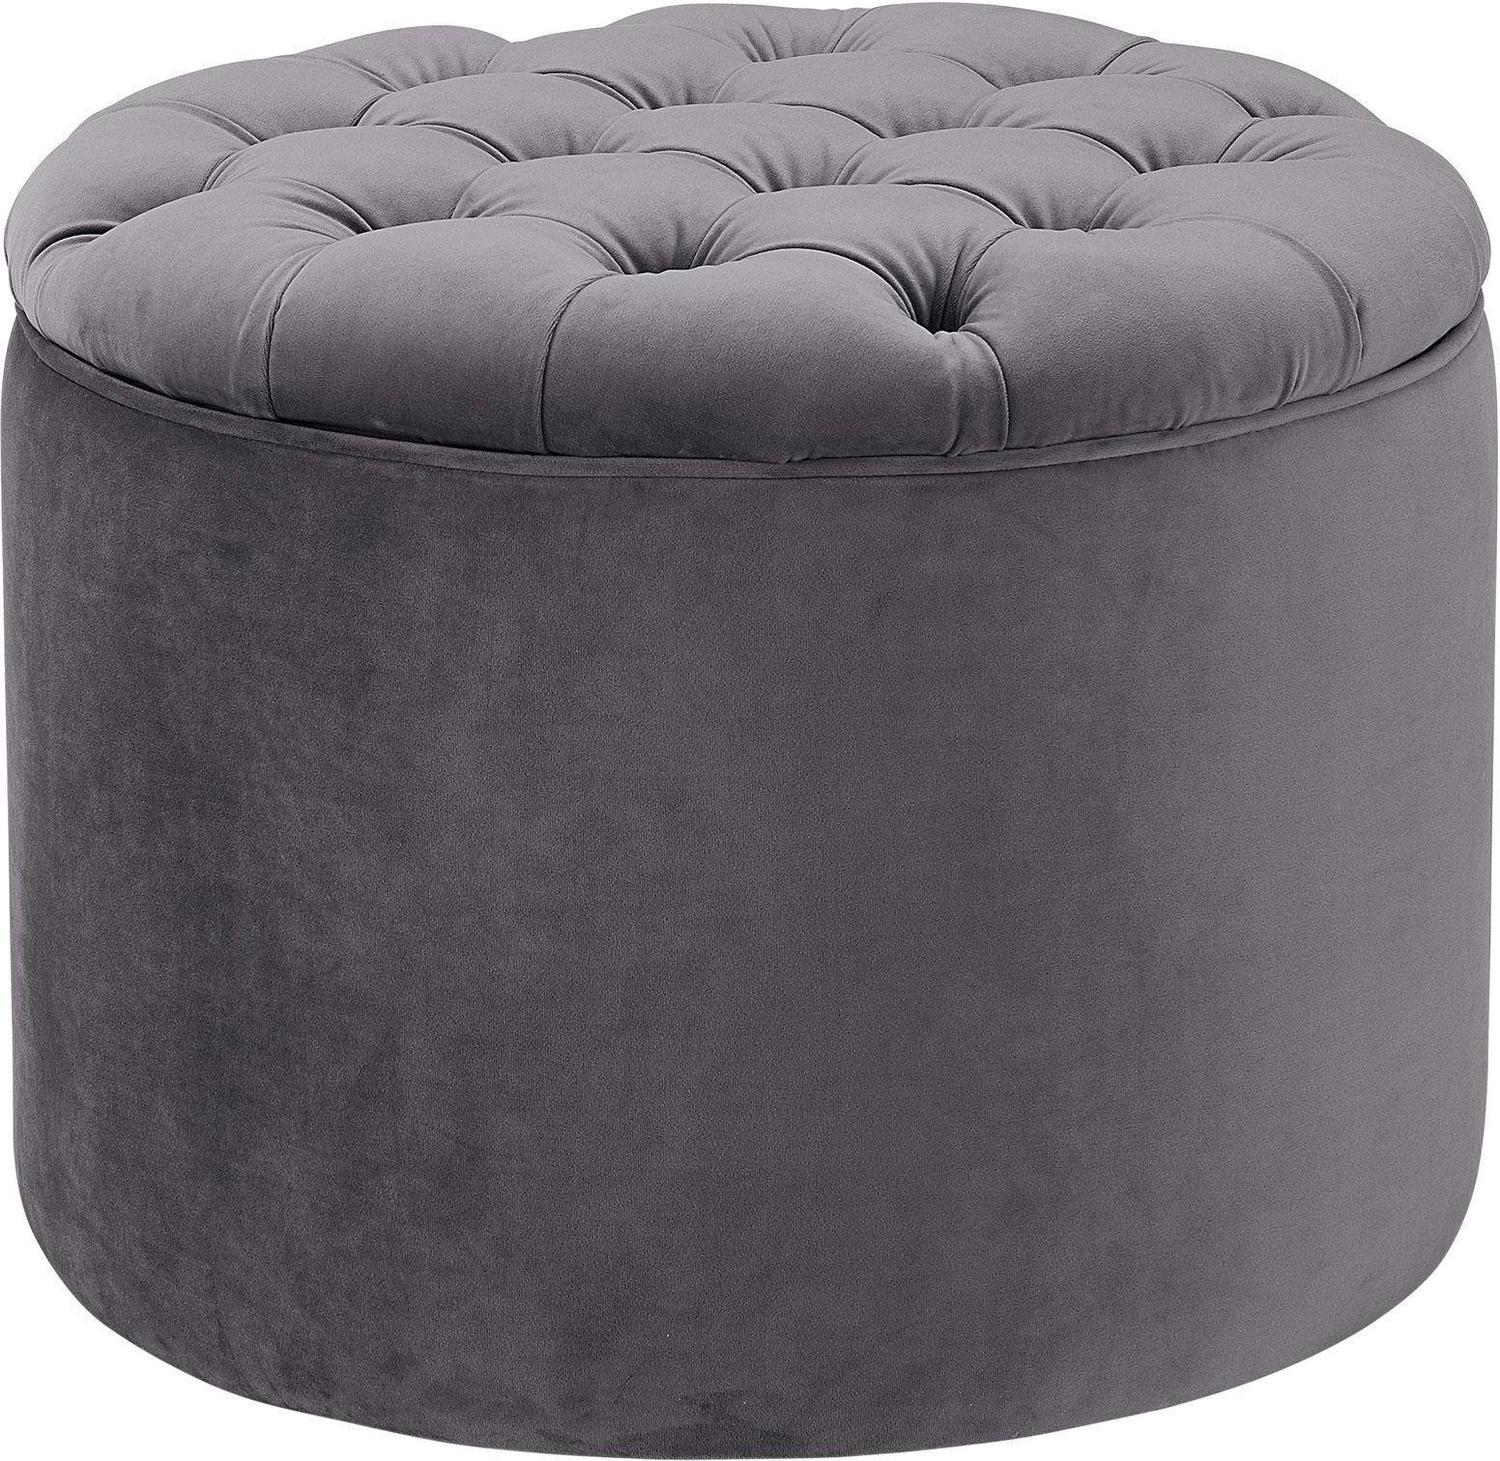 comfy white accent chair Tov Furniture Ottomans Grey